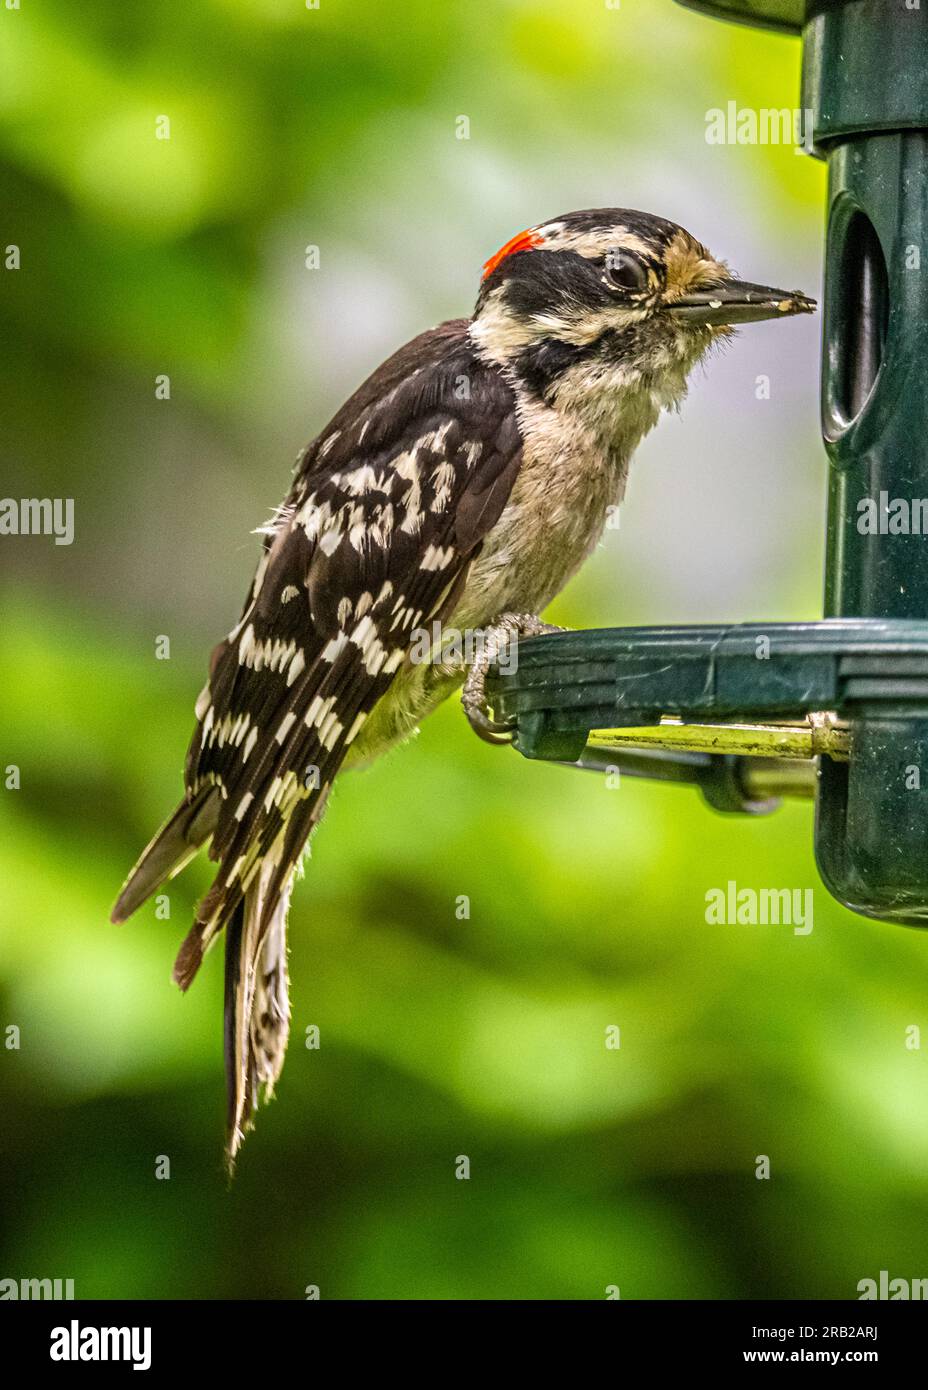 Downy Woodpecker. Visited the garden and sat on the bird feeder. Eating sunflower seeds. Stock Photo